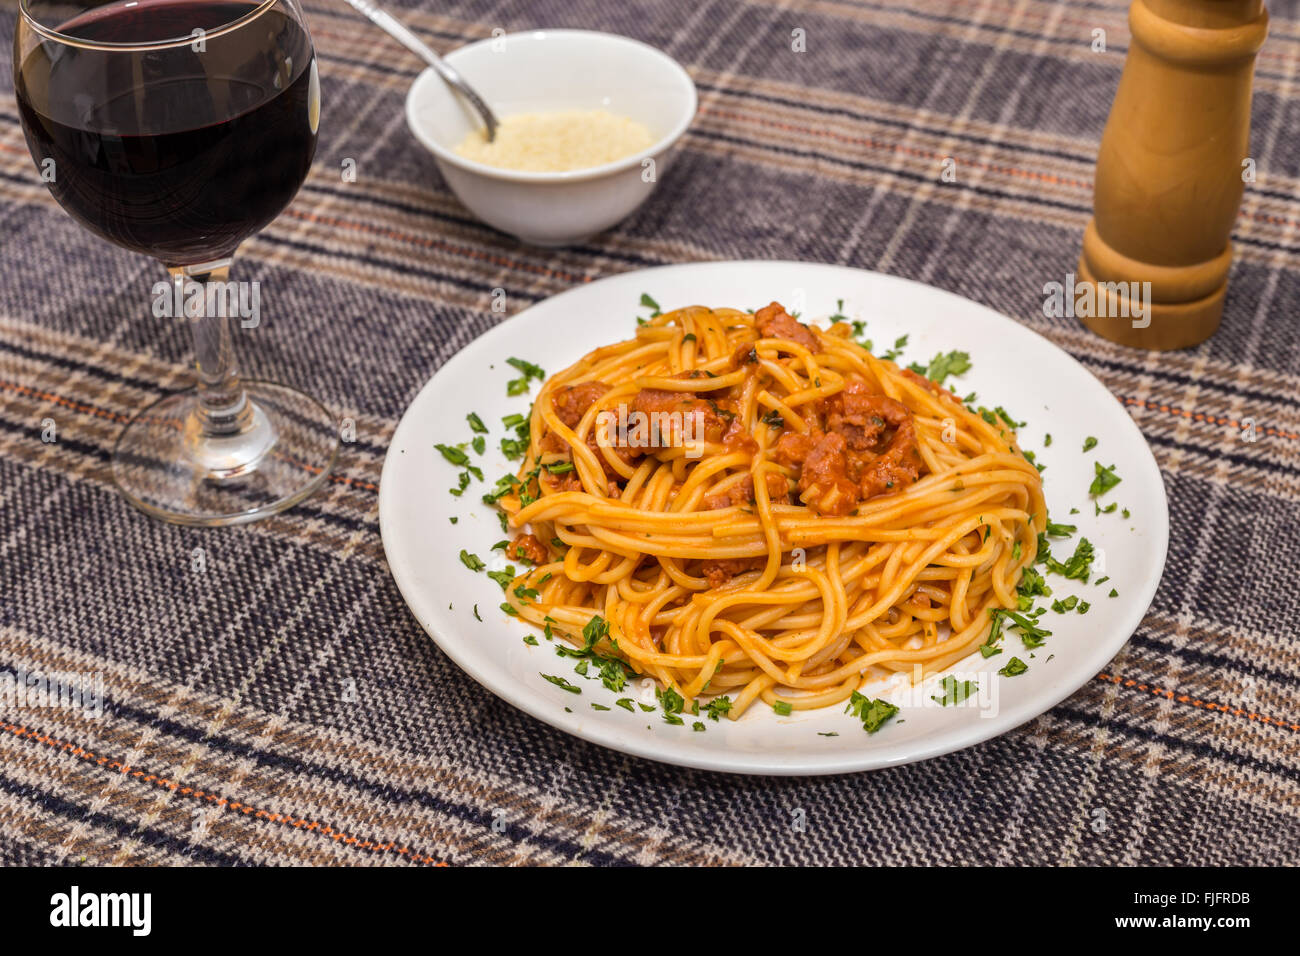 White plate with spagetti bolognese, glass of wine and bowl of parmesan. Stock Photo